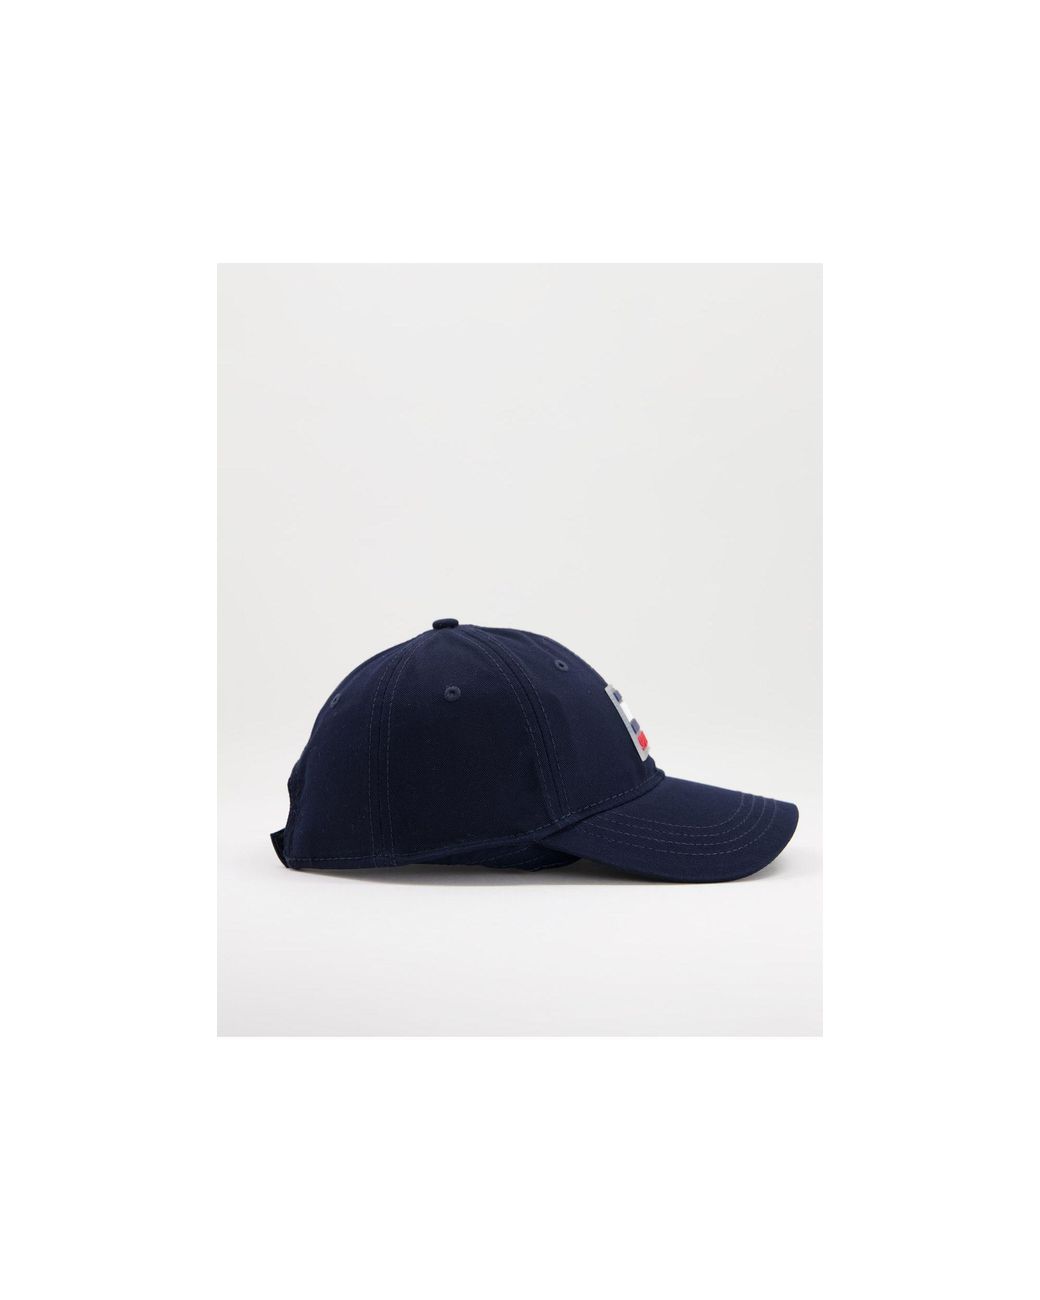 Tommy Hilfiger Jace Twill Cap in Navy (Blue) for Men - Lyst